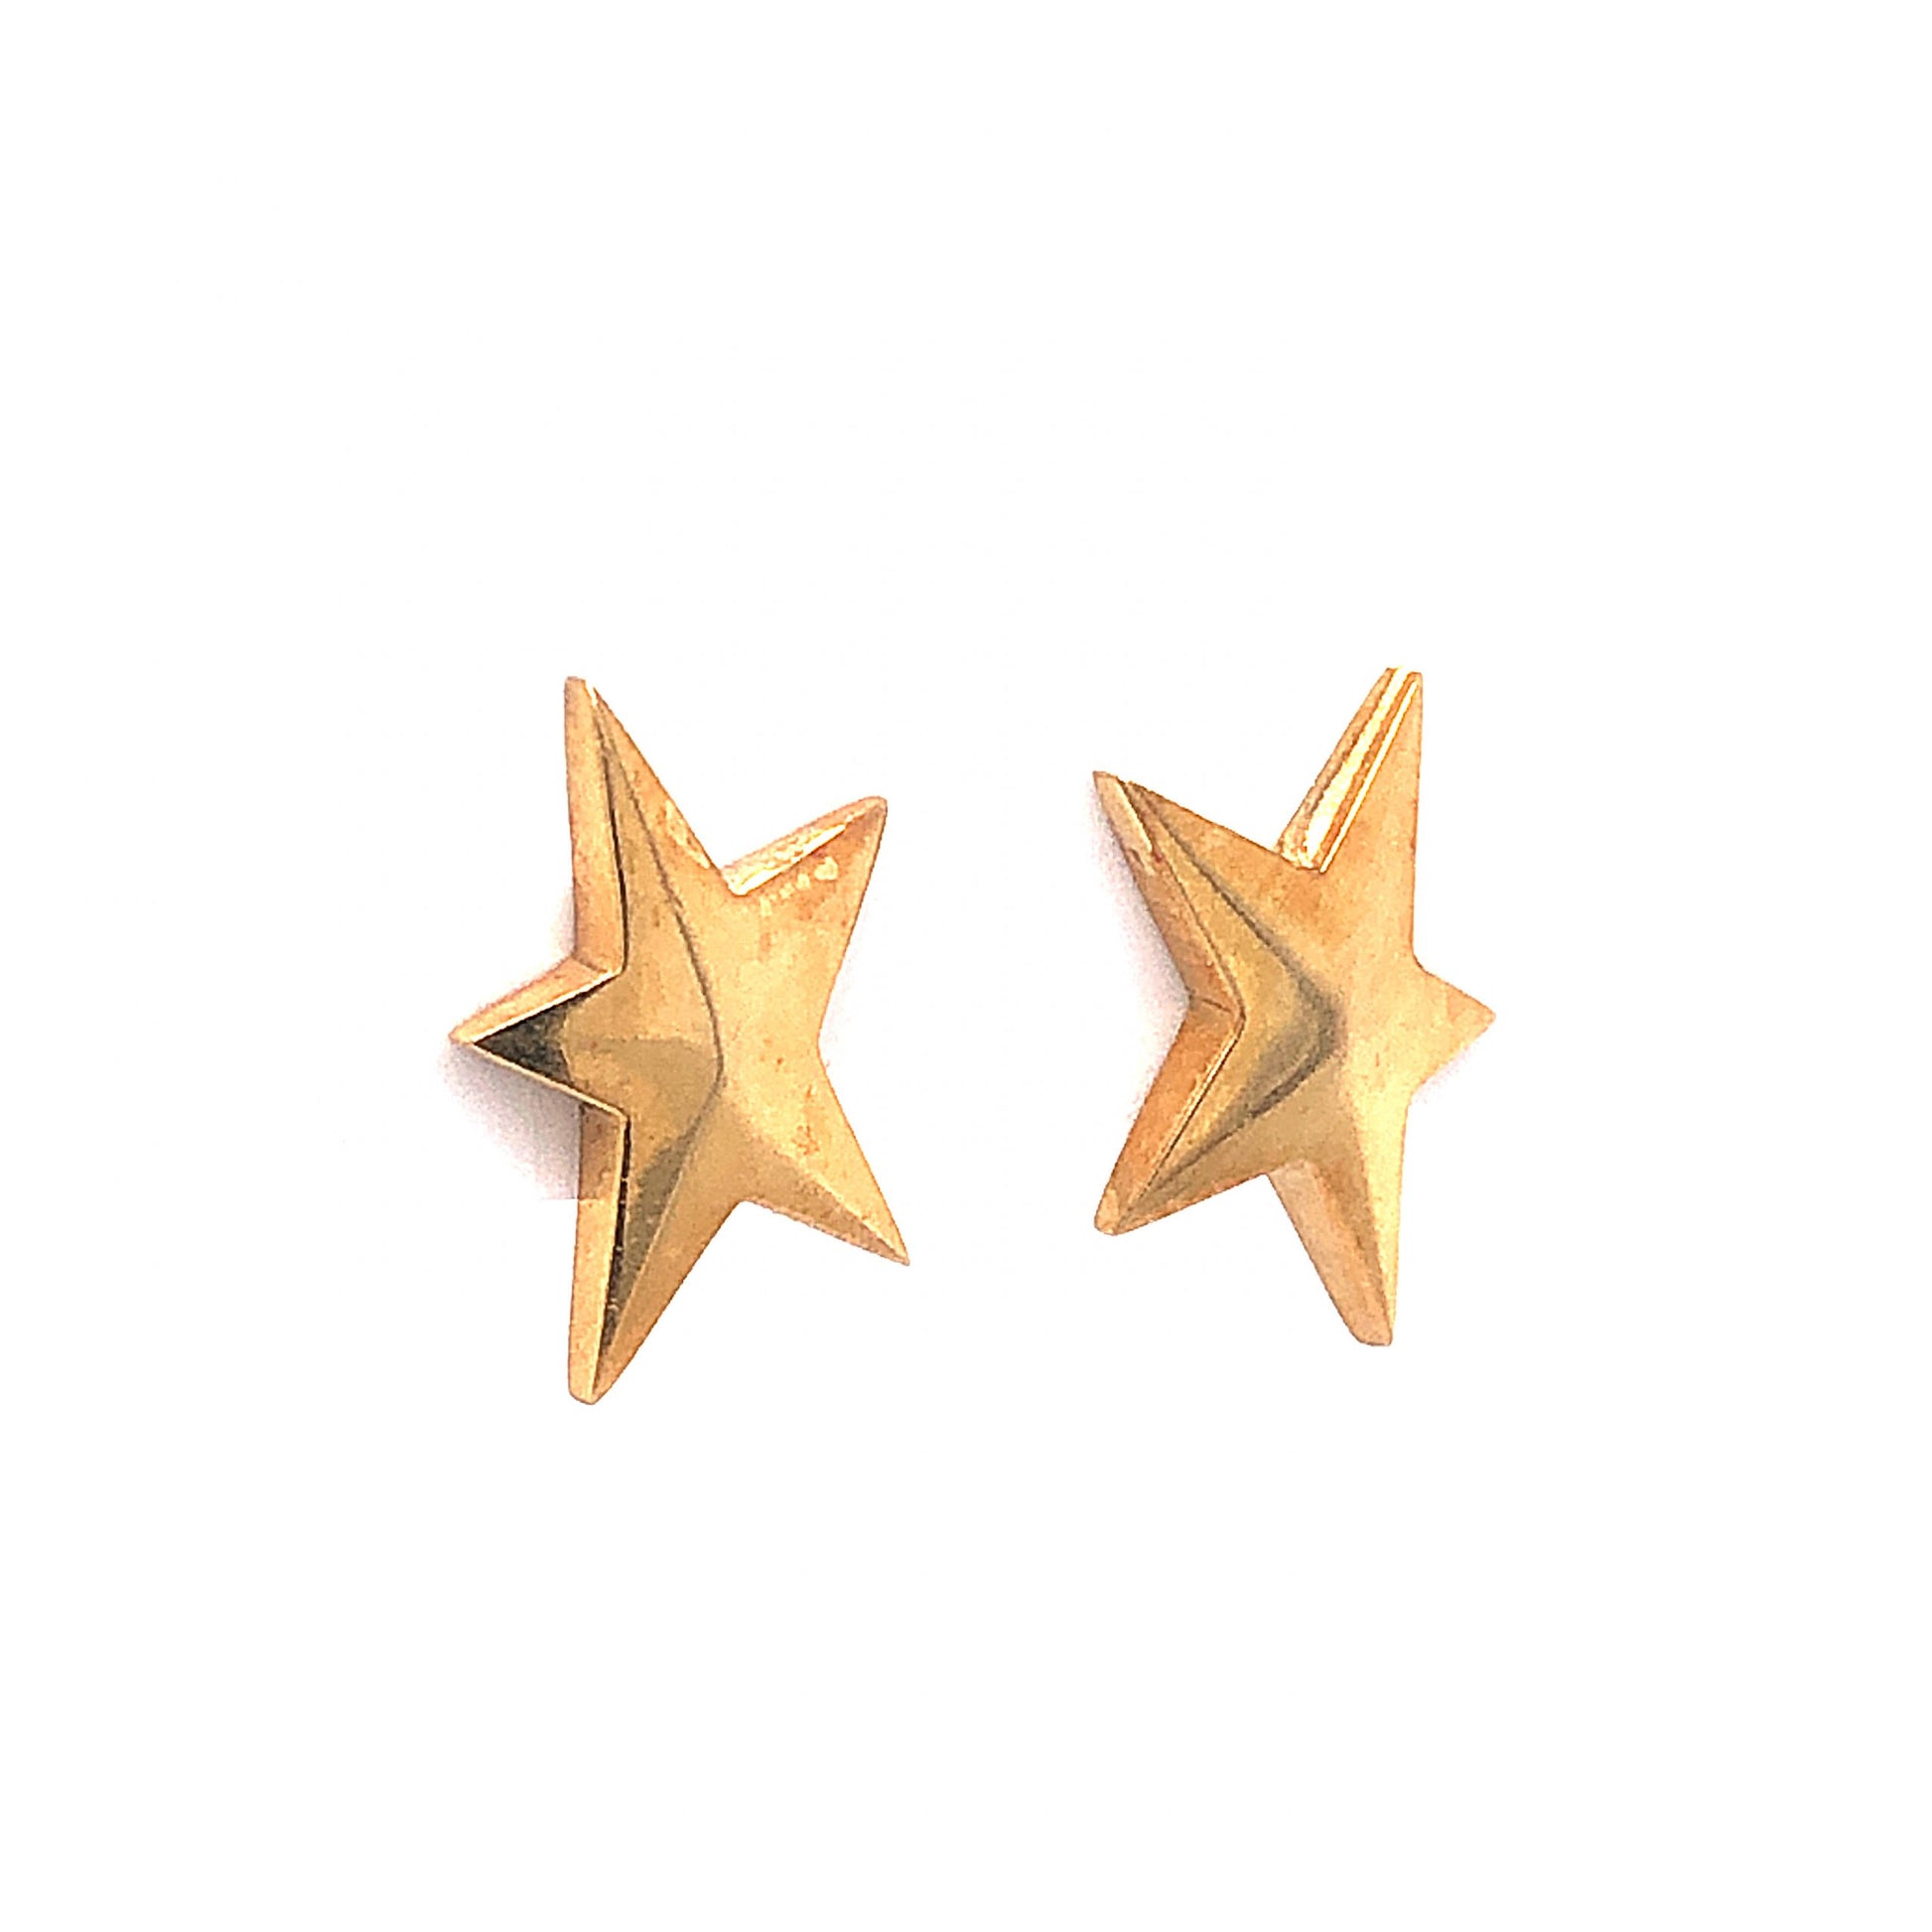 Tiffany & Co. Star Stud Earrings in 18k Yellow GoldComposition: 18 Karat Yellow Gold Total Gram Weight: 3.5 g Inscription: 1985 Tiffany & Co. 18k
      